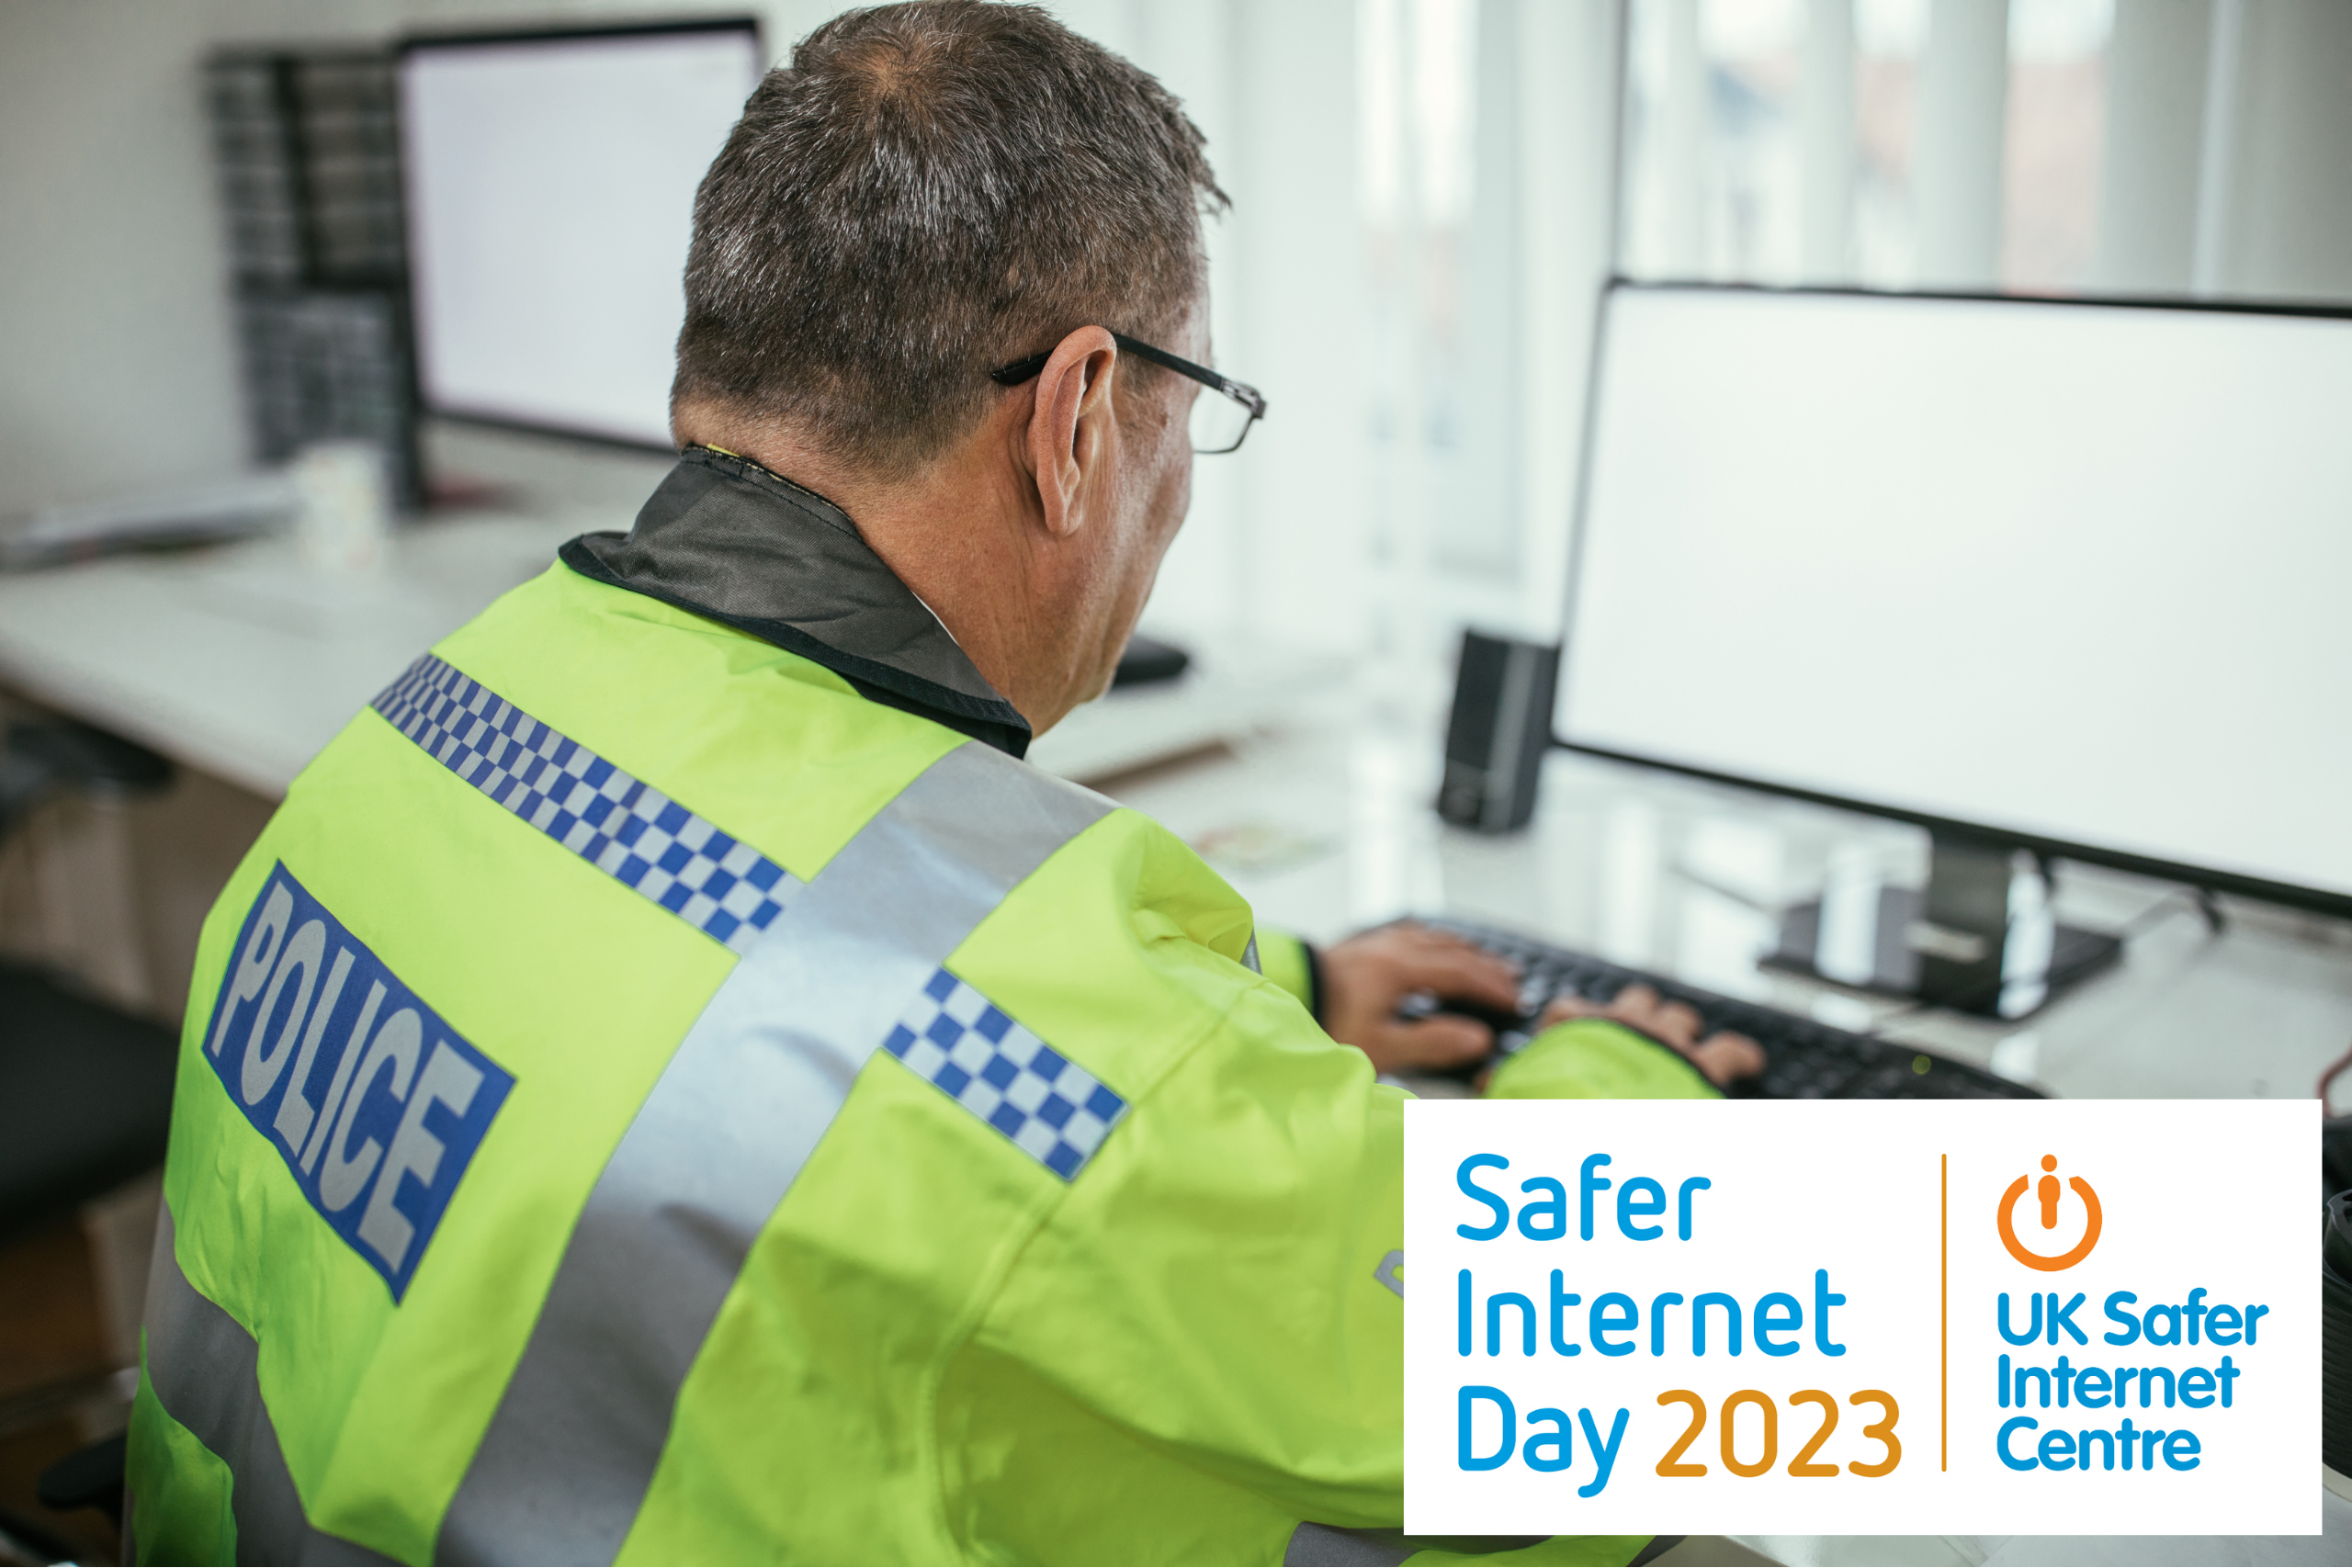 A male Police Officer uses a computer. In the corner of the image is the Safer Internet Day logo.